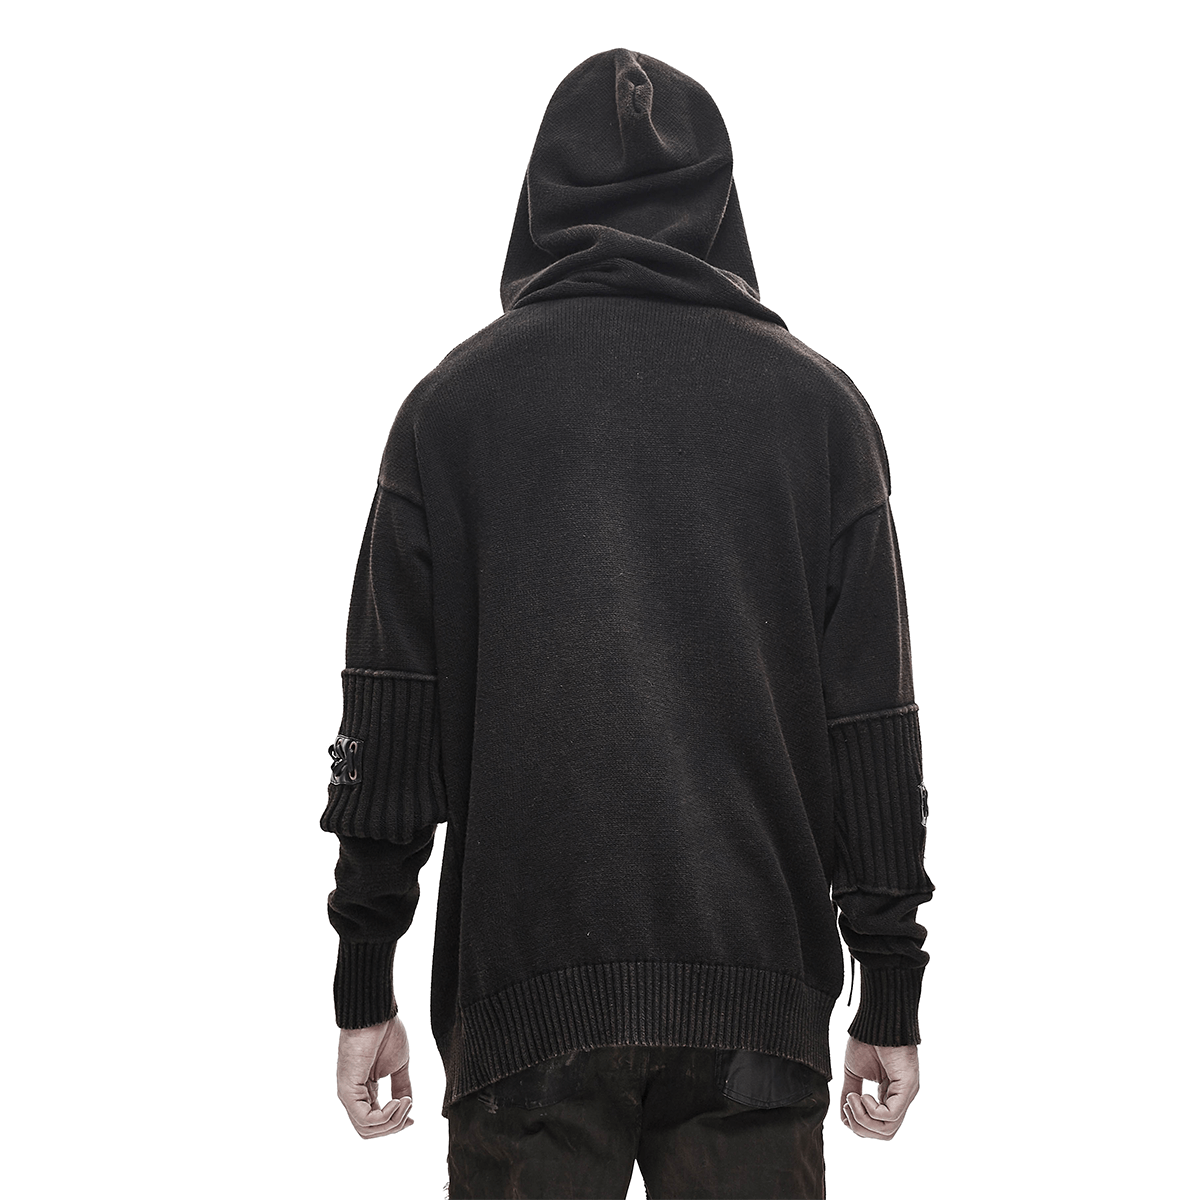 Steampunk Long Sleeves Hooded Sweater / Men's Loose Hoodie with Lace up on Sleeves - HARD'N'HEAVY